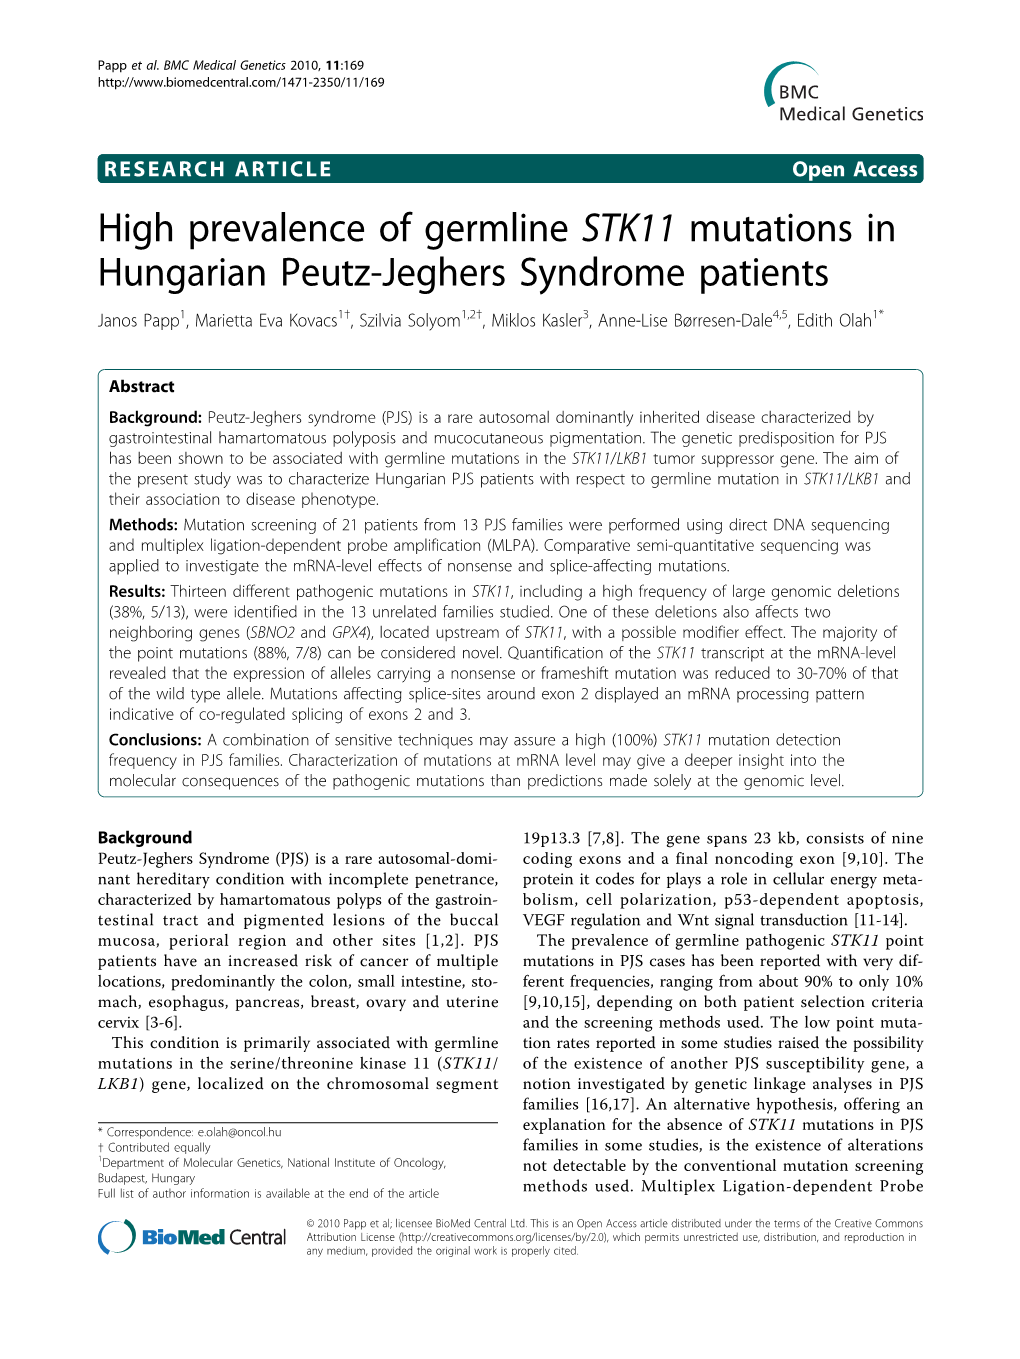 High Prevalence of Germline STK11 Mutations in Hungarian Peutz